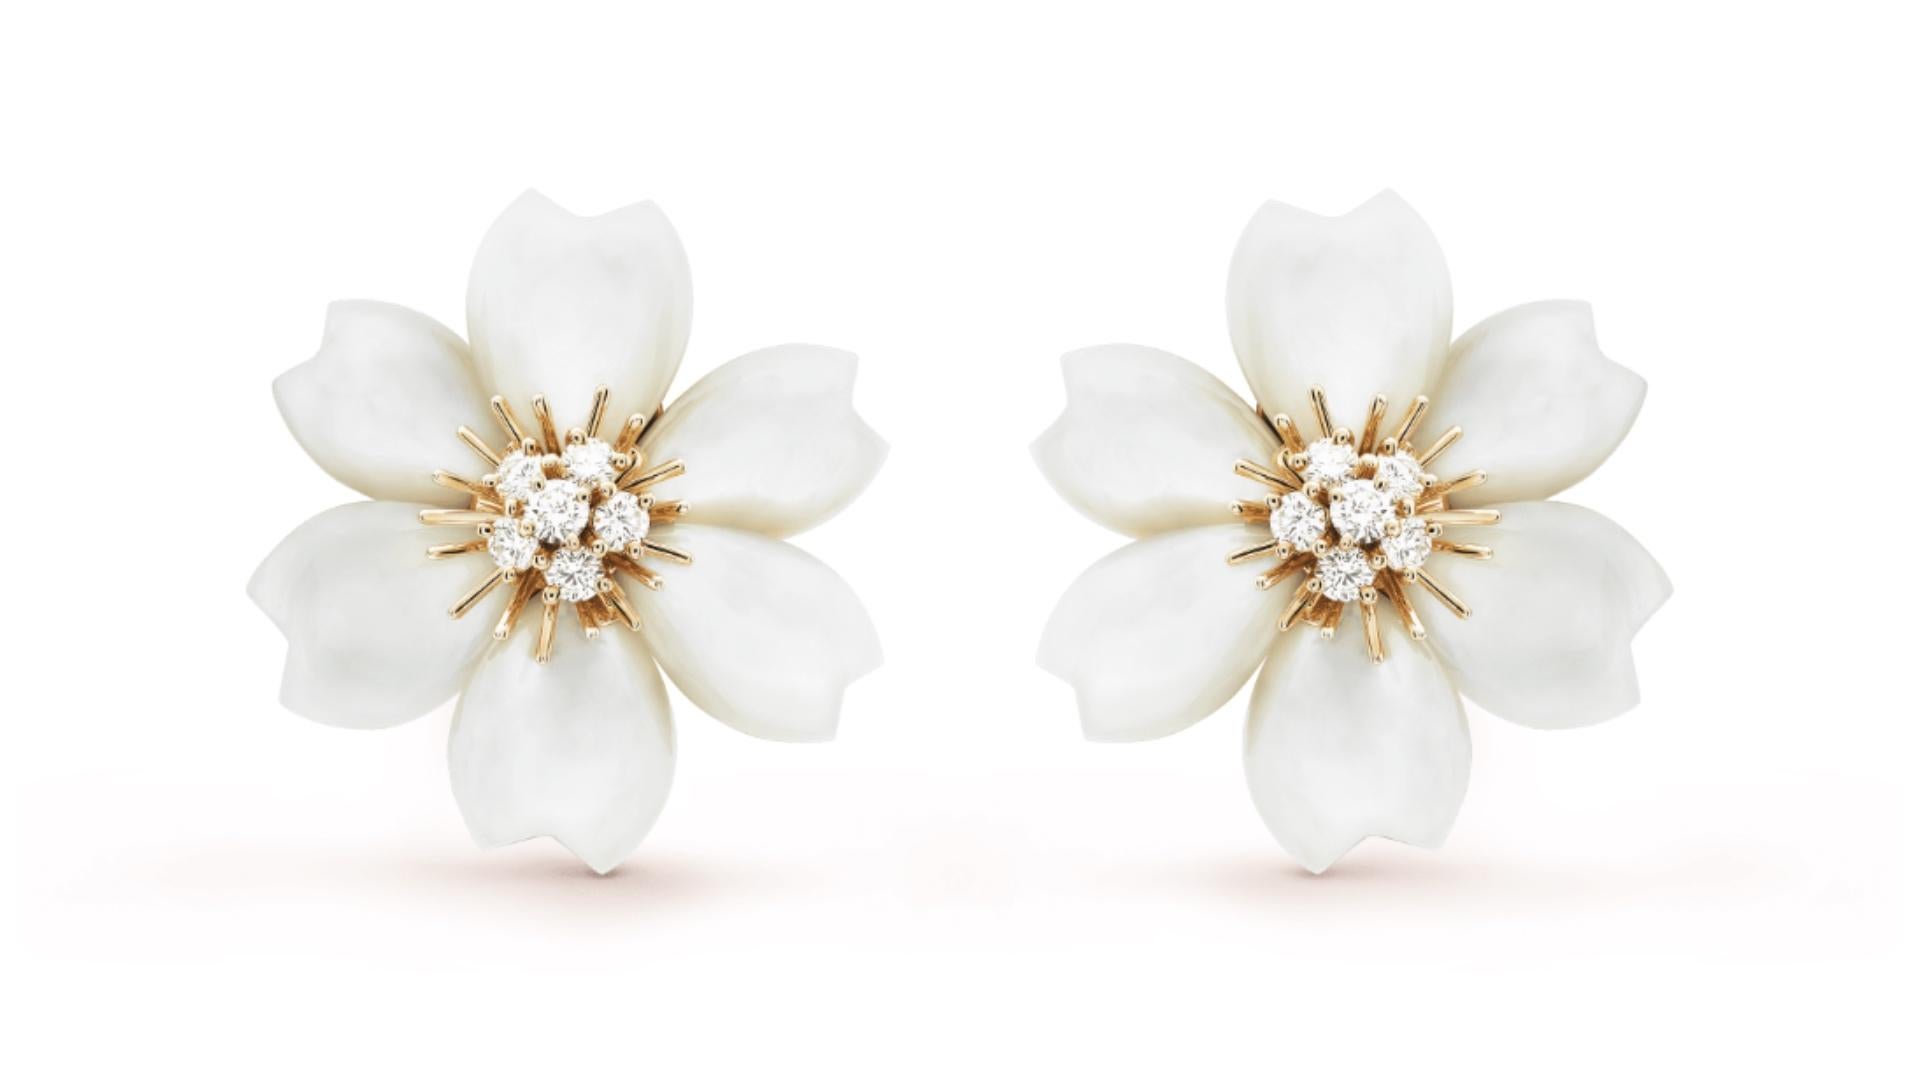 Van Cleef & Arpels Pair of Gold, Mother-of- Pearl and Diamond
'Rose de Noel' Ear-clips, France, crafted in 18k yellow gold, each flower consists of six heart shaped mother of pearl petals, centered with a floret of 6 round brilliant cut diamonds. 12